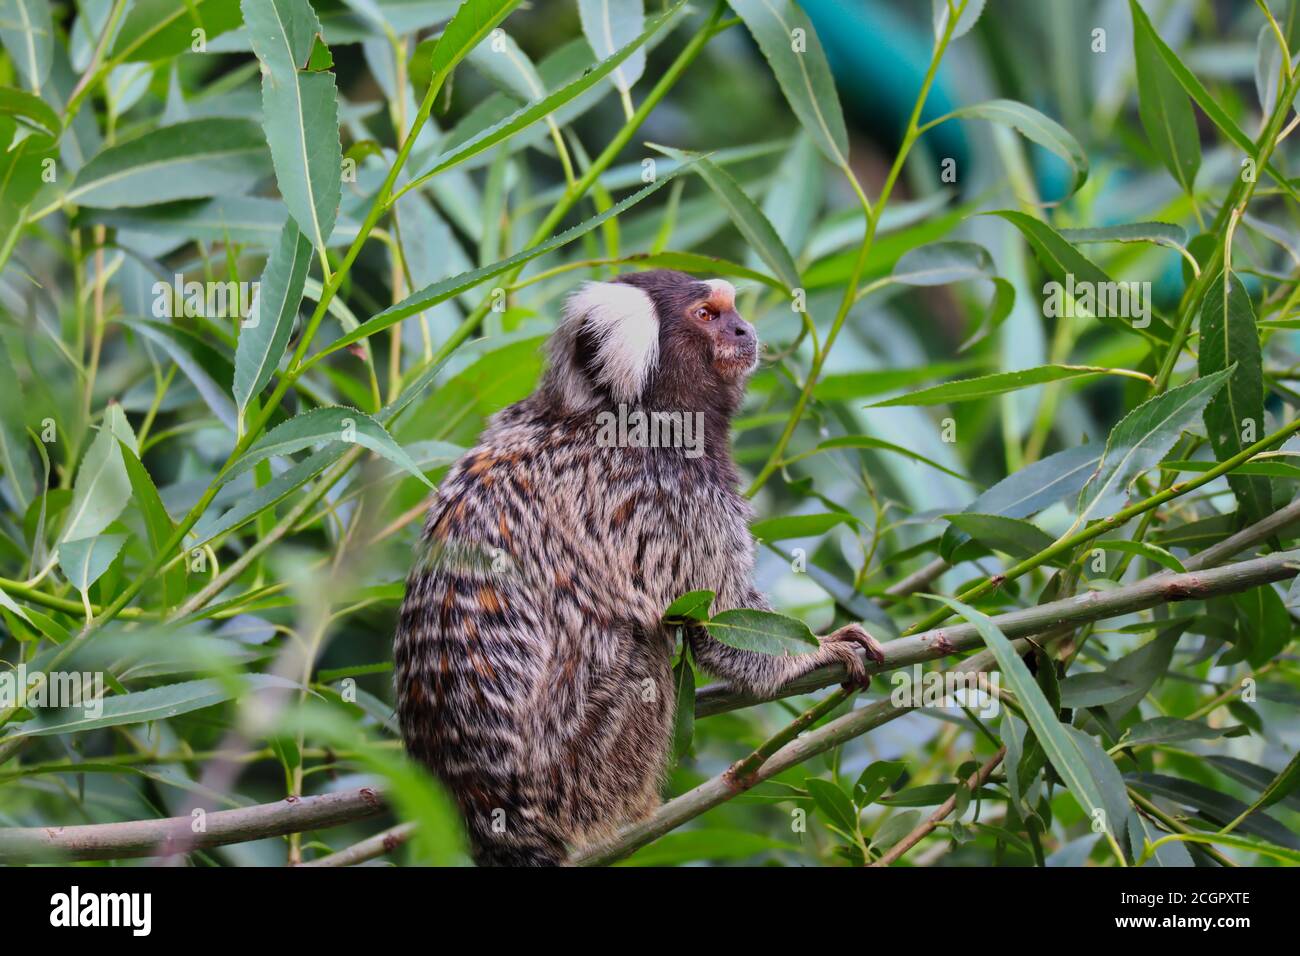 The Common Marmoset (Callithrix Jacchus) is a New World Monkey. Cute Little Primate on Tree Branch in Czech Zoological Garden. Stock Photo